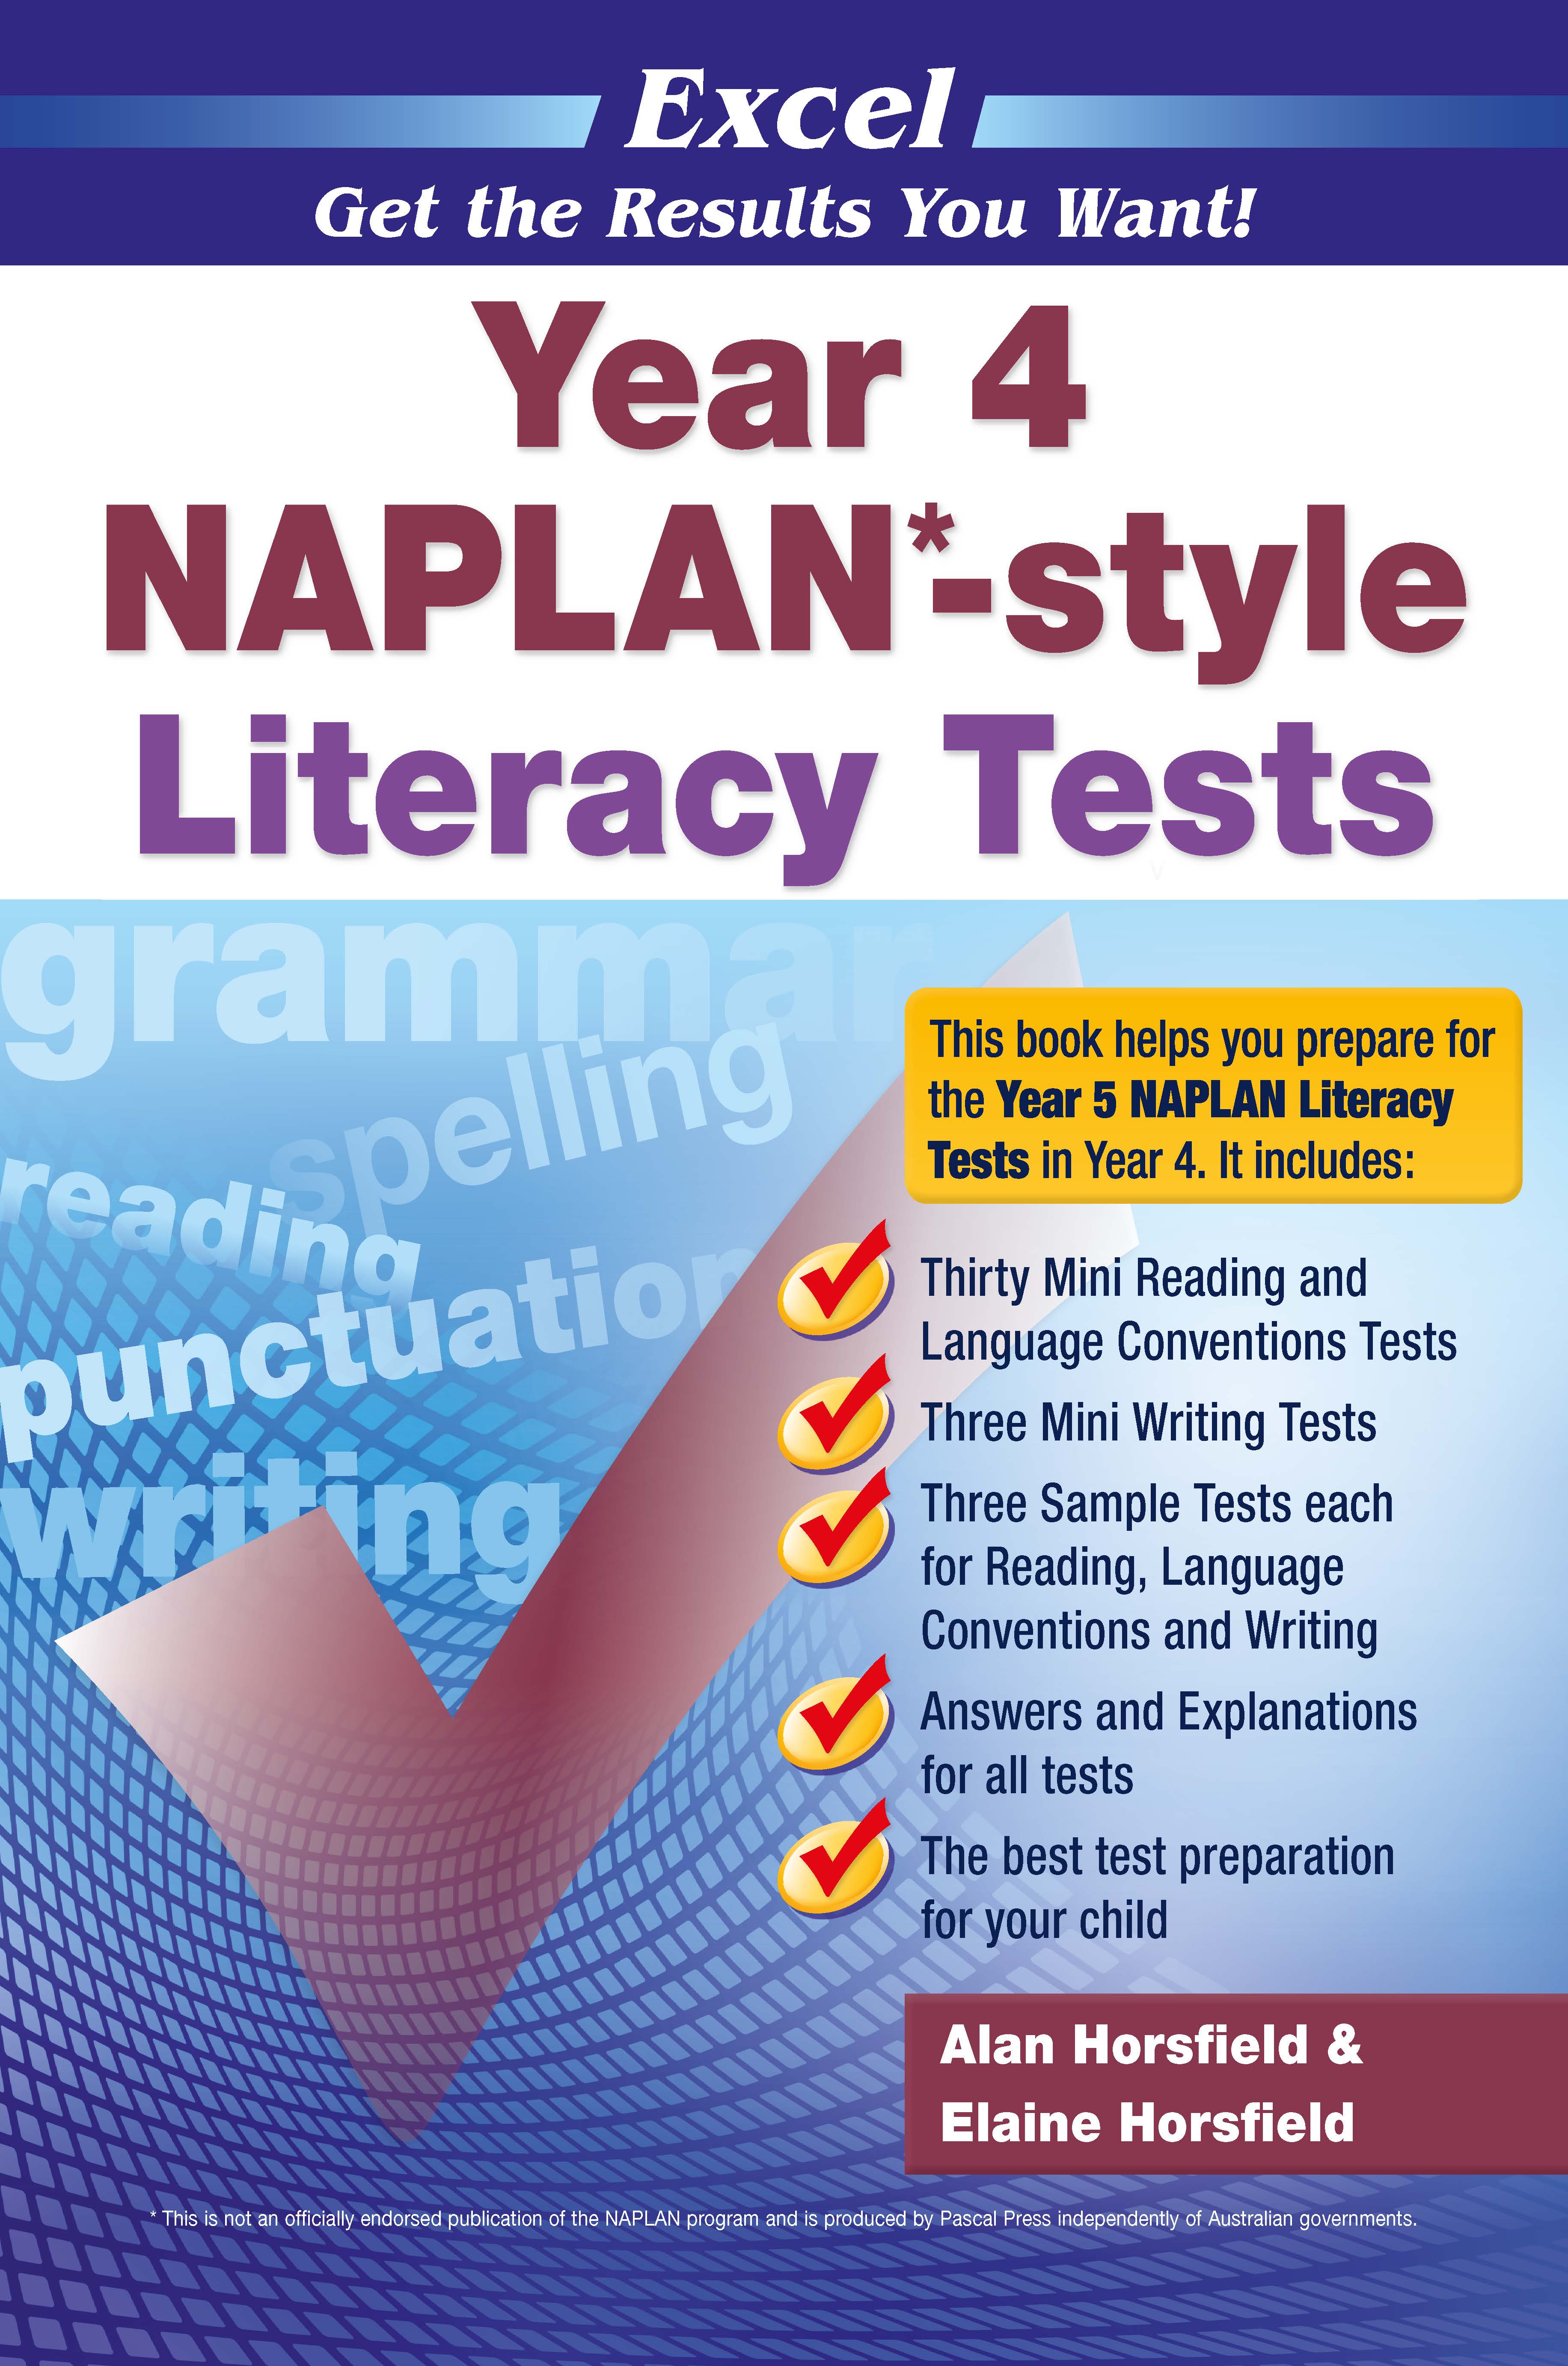 Picture of Excel NAPLAN*-style Literacy Tests Year 4